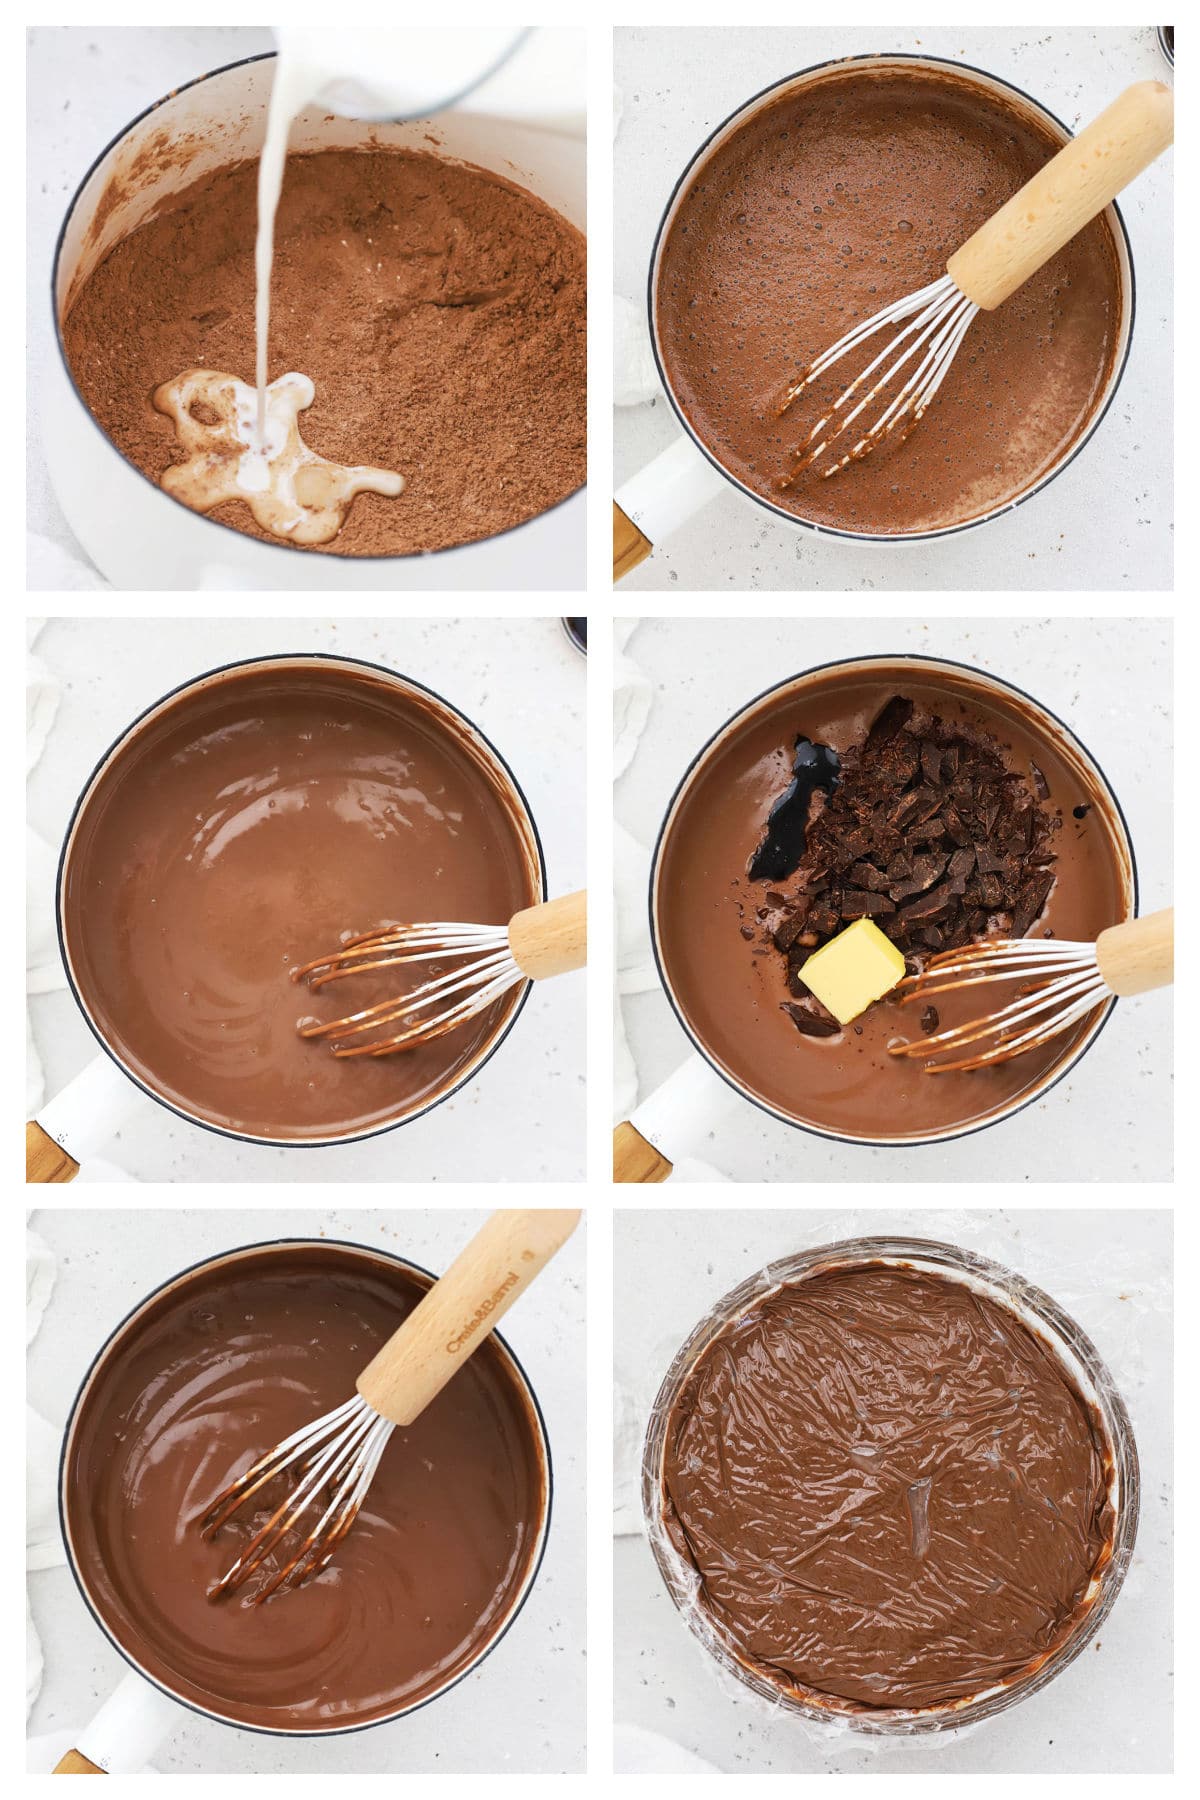 making homemade gluten-free chocolate pudding step by step